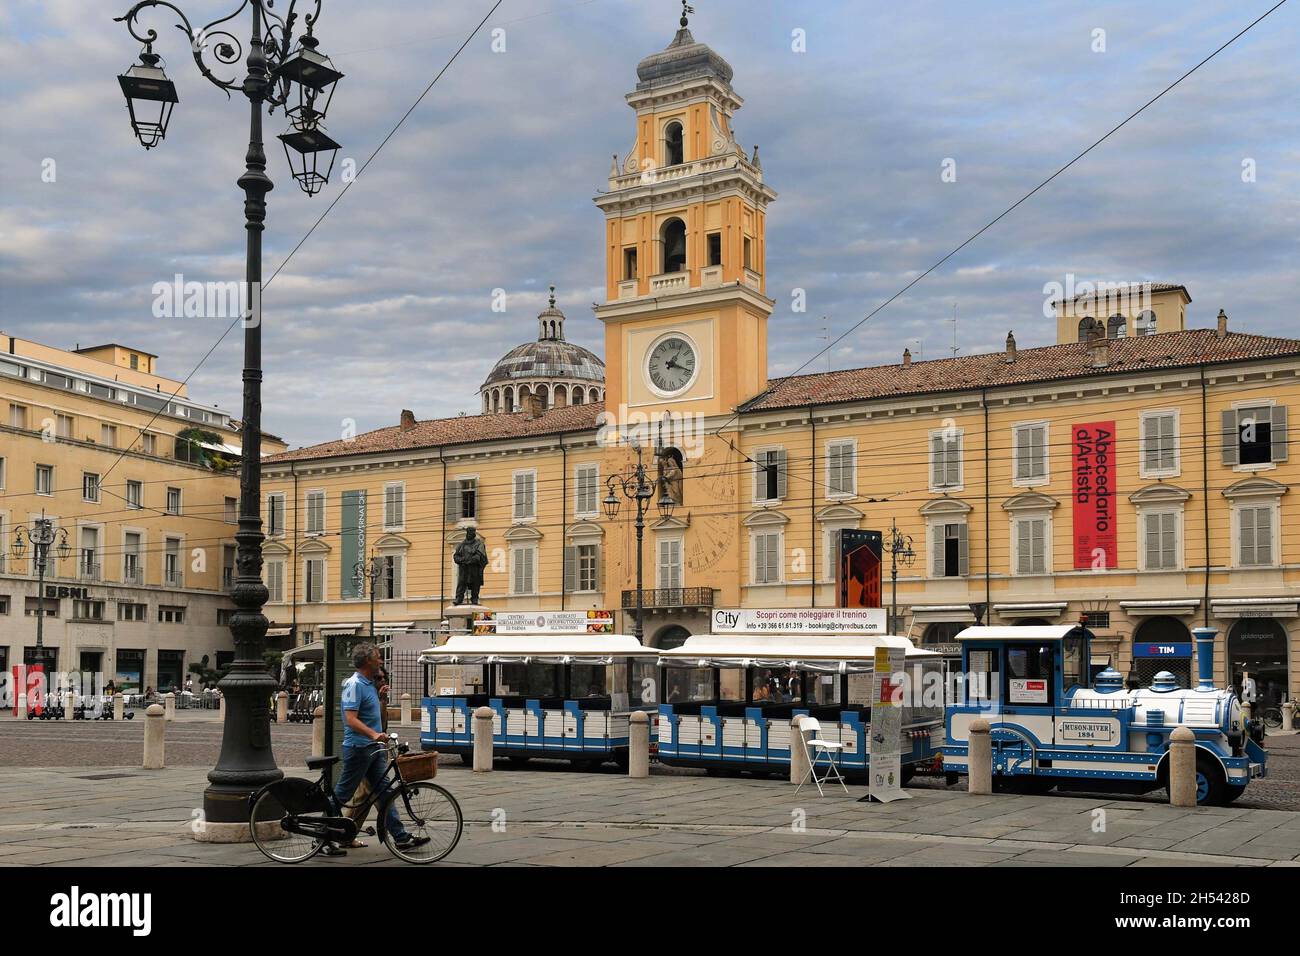 Giuseppe Garibaldi Square in the old town with a tourist little train and the Governor's Palace (13th century), Parma, Emilia-Romagna, Italy Stock Photo